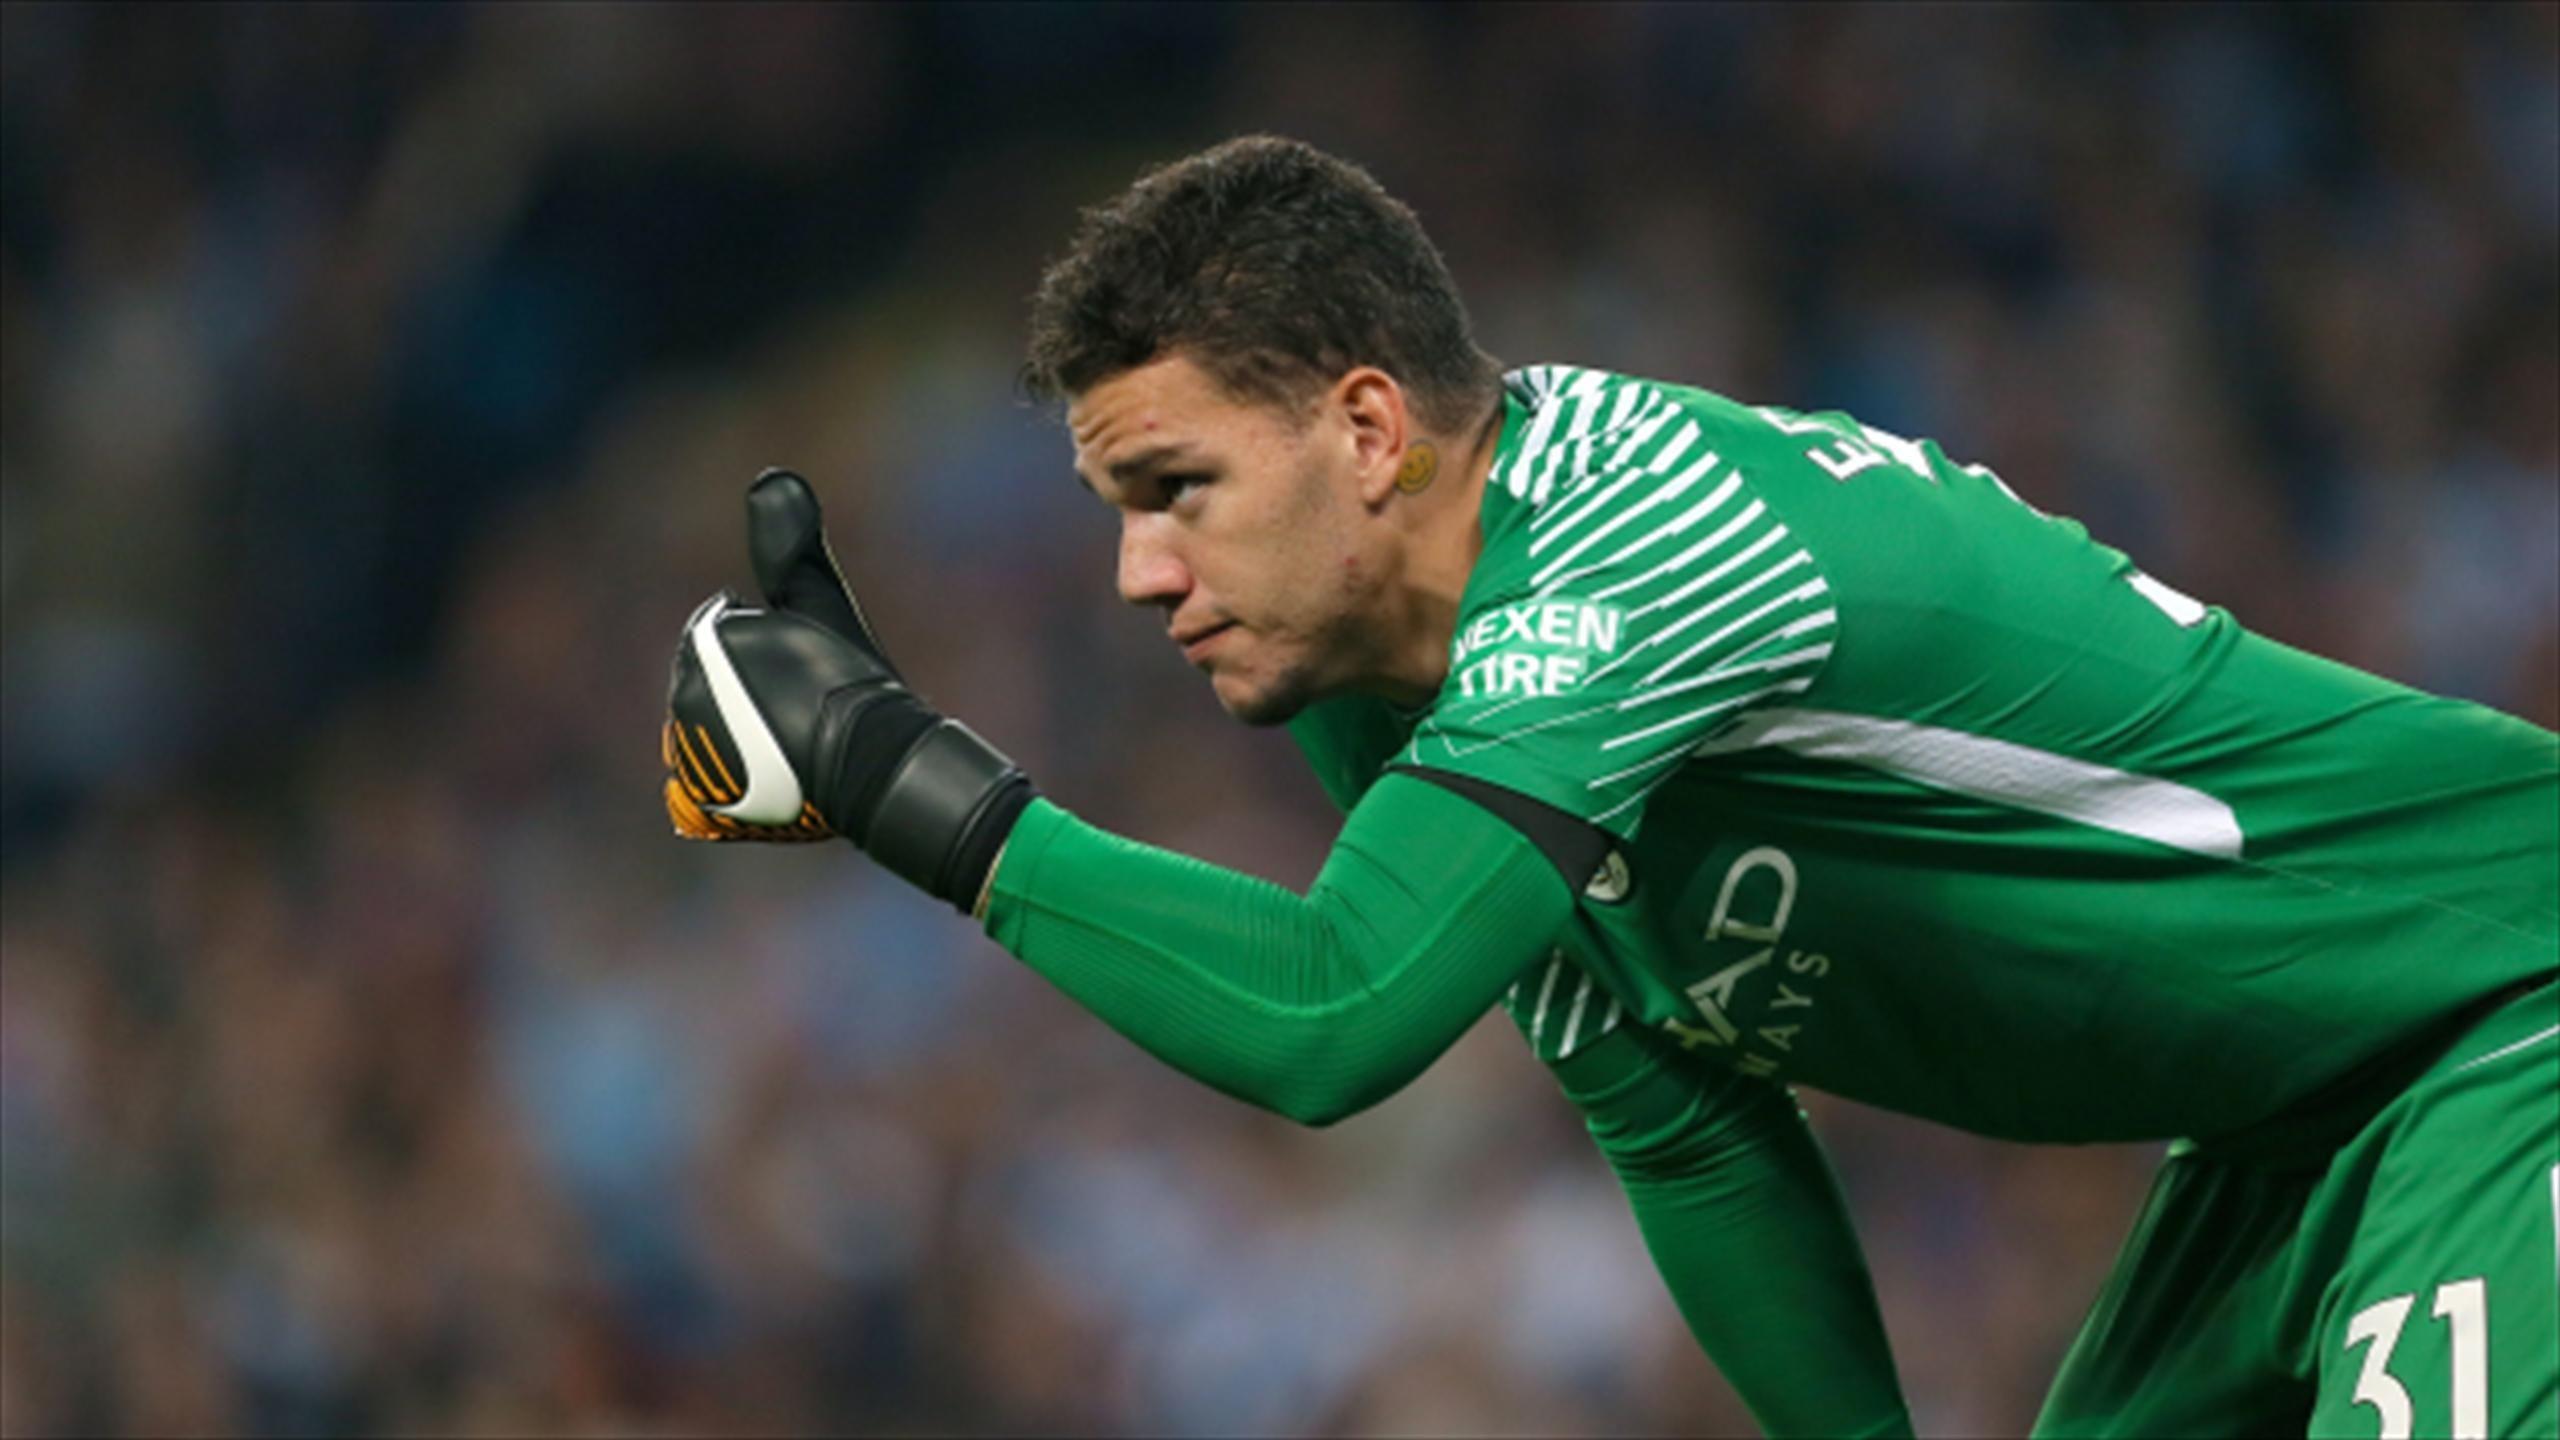 Ederson in contention after swift recovery